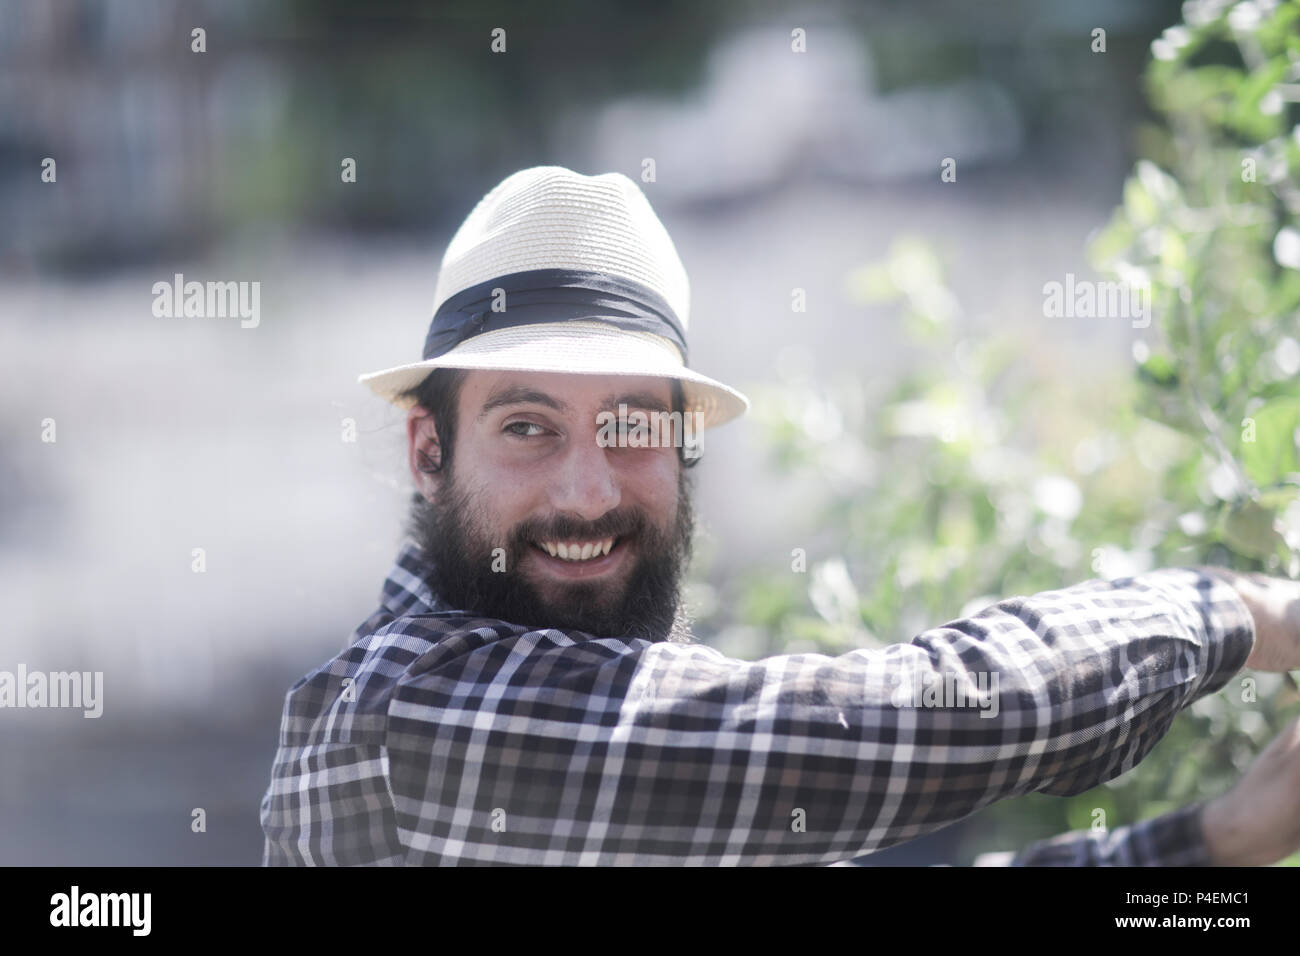 Smiling Man standing in the garden pruning a shrub Stock Photo